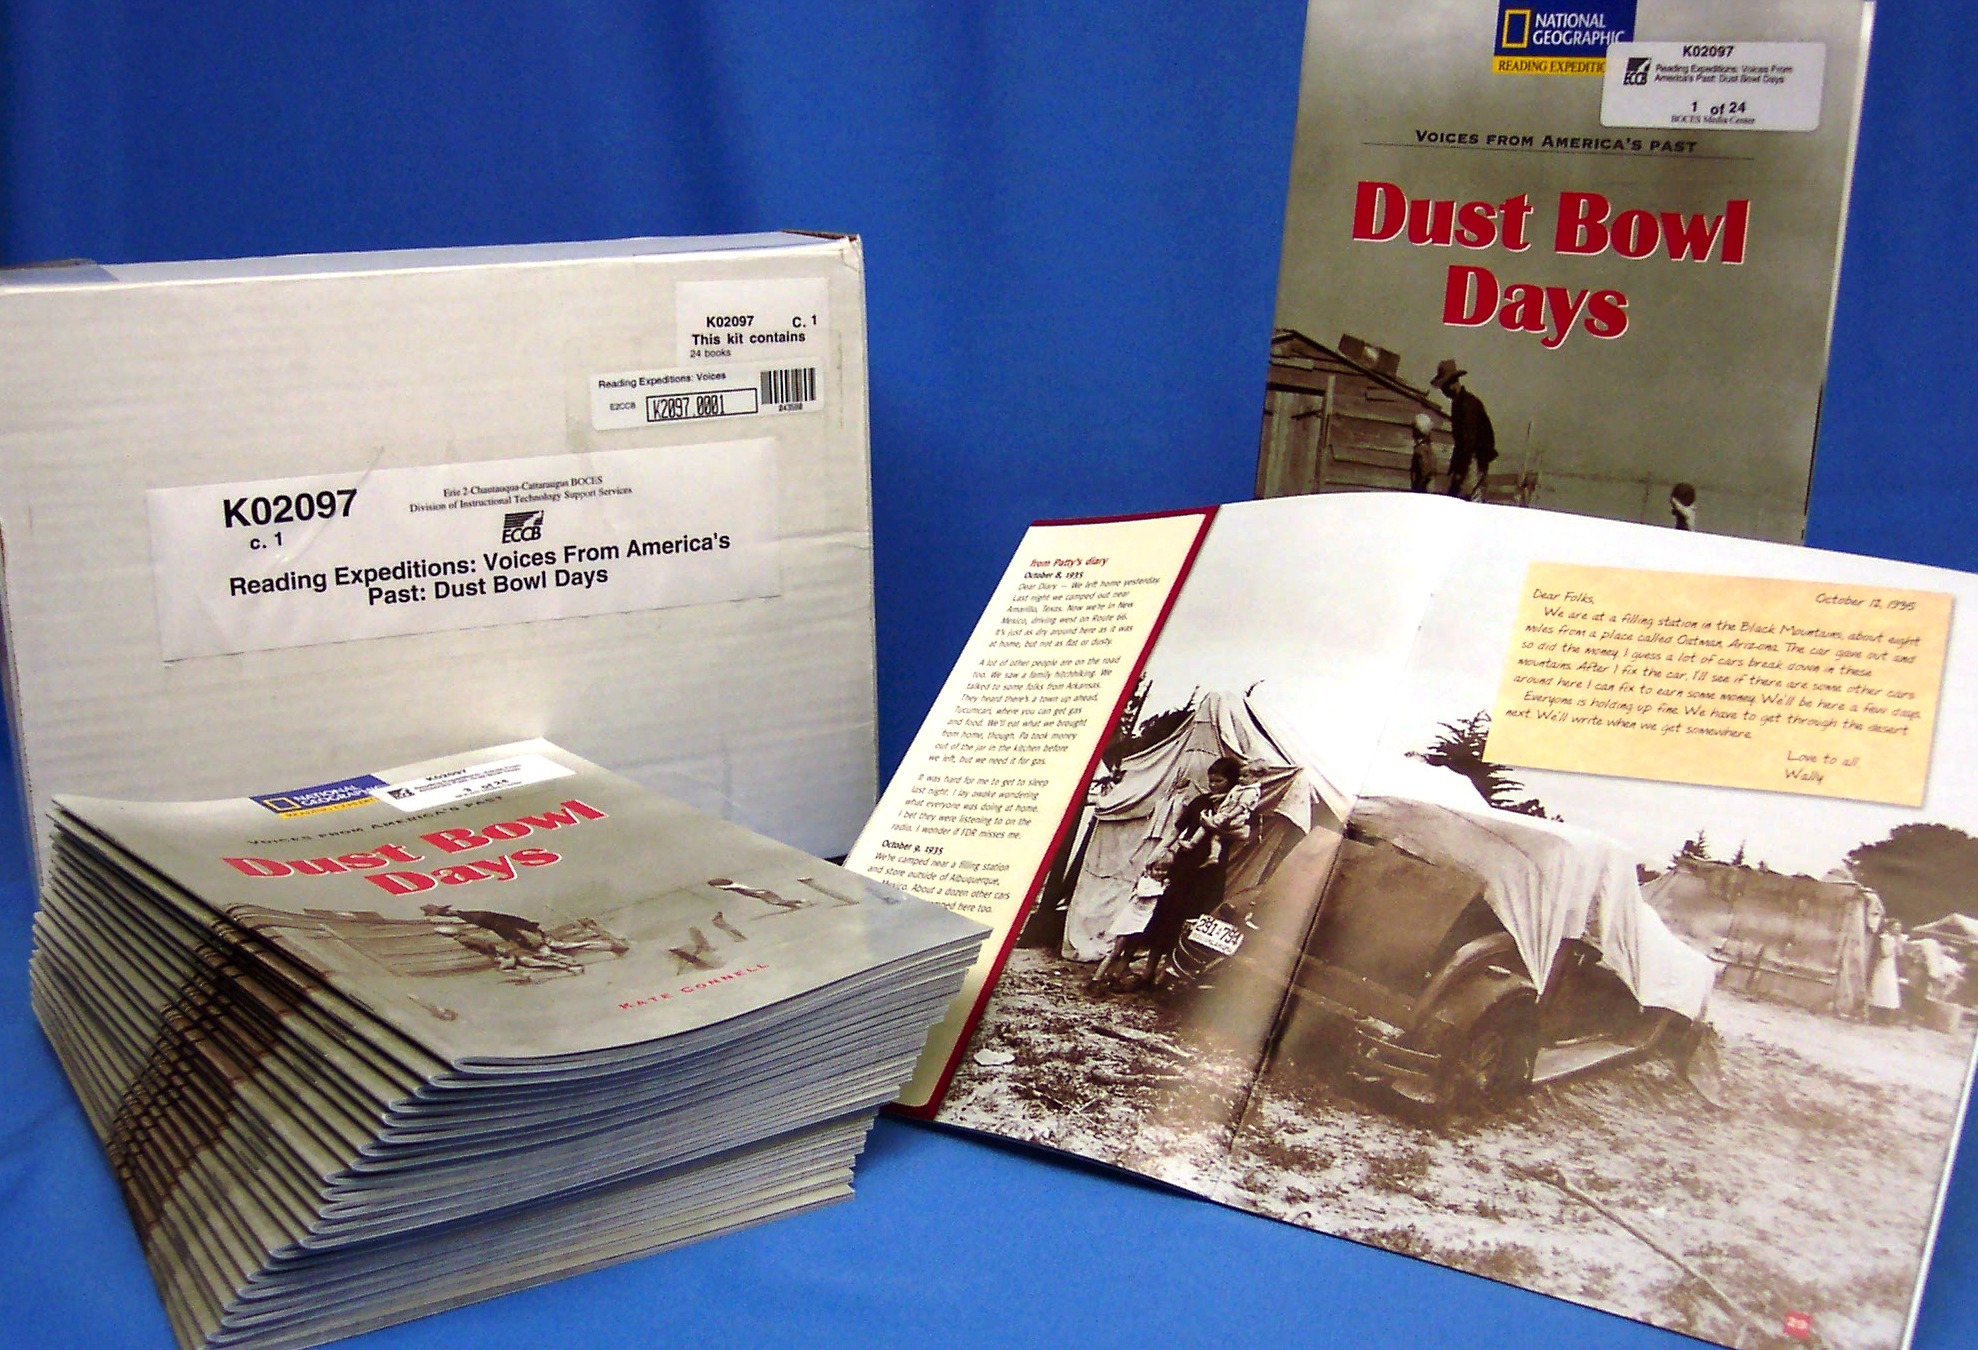 Reading Expeditions: Voices From America's Past: Dust Bowl Days